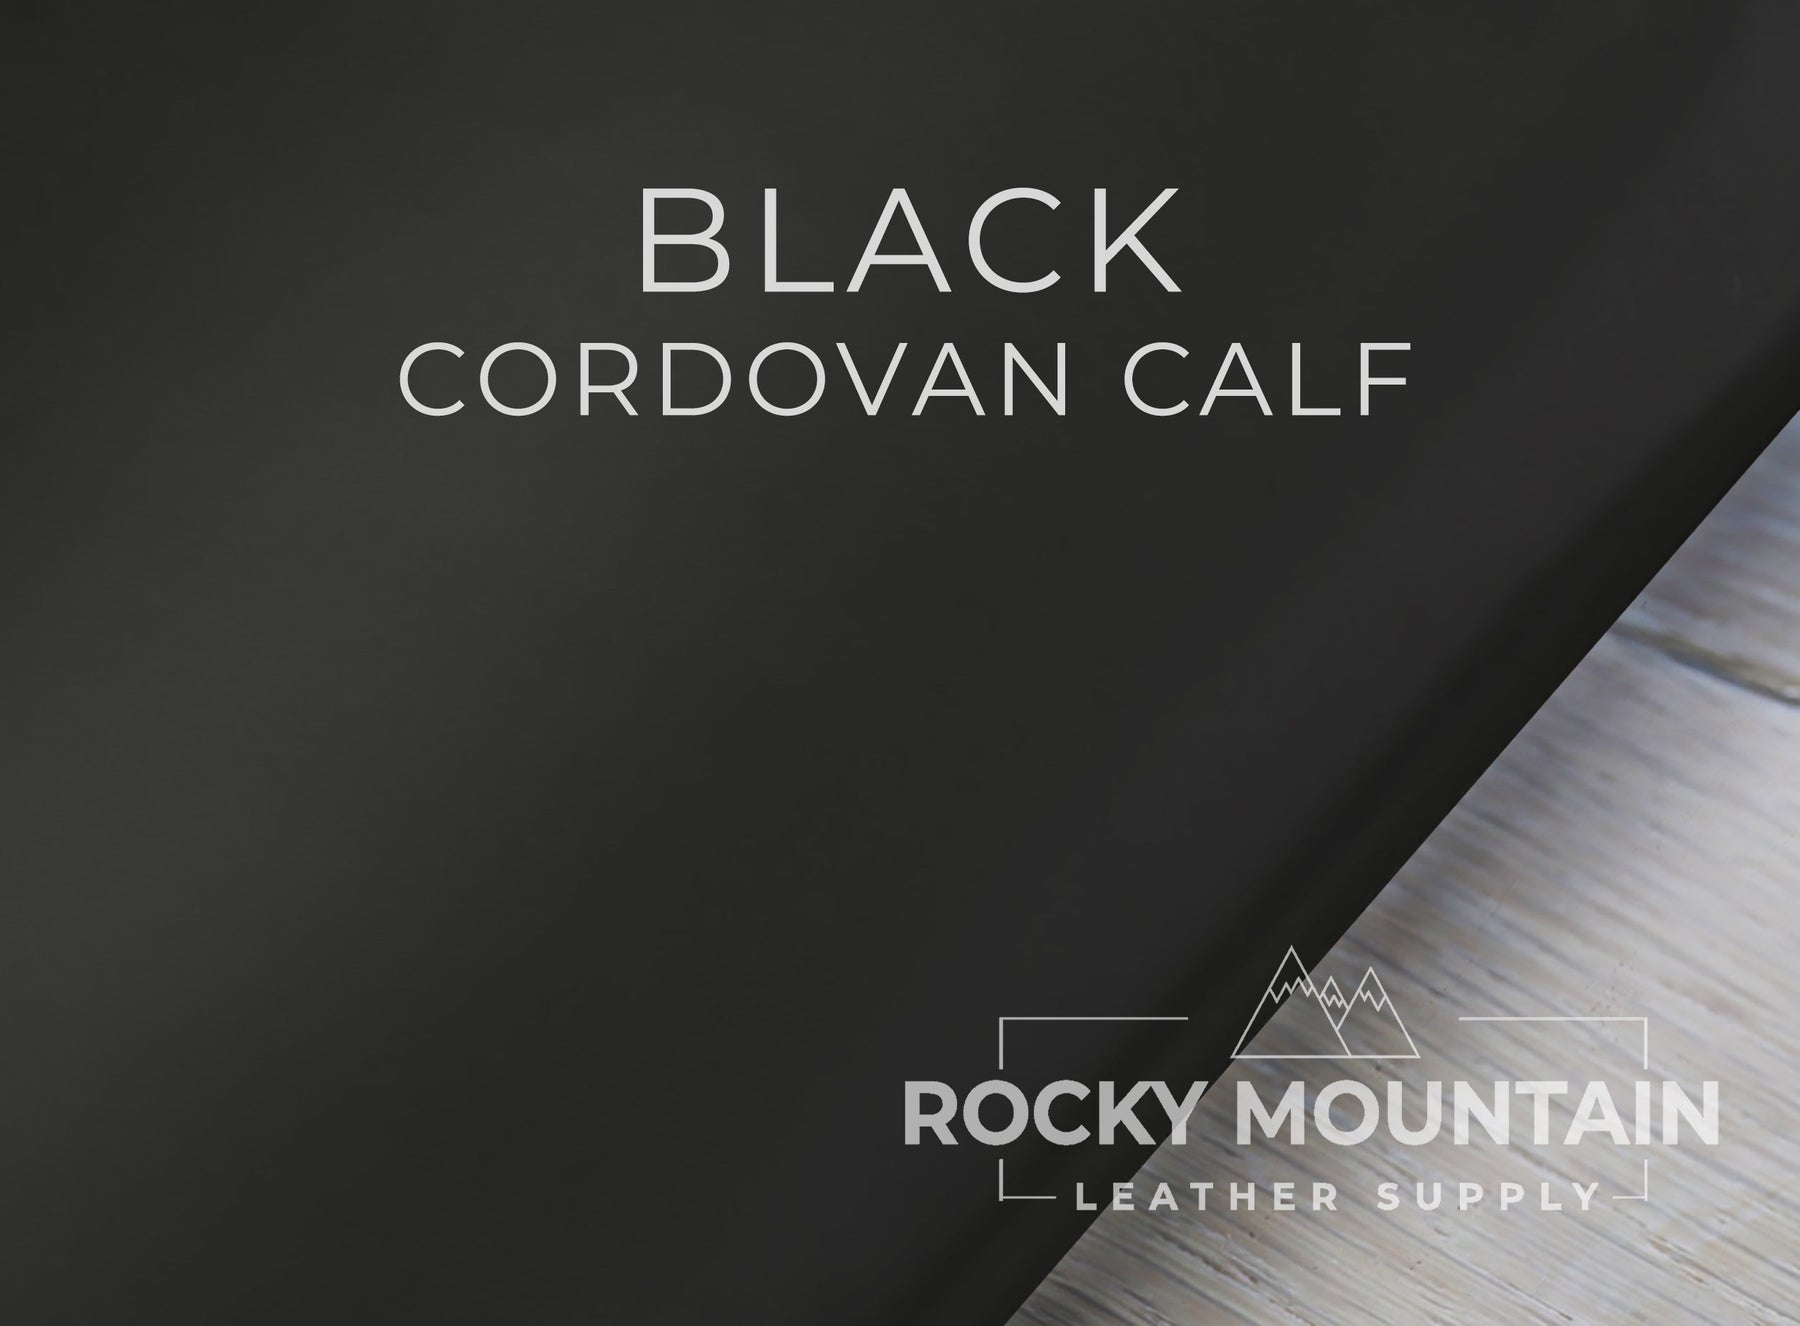 Cordovan Calf 🇪🇺 - Luxury Calfskin Leather "Finished like Shell Cordovan" (HIDES)